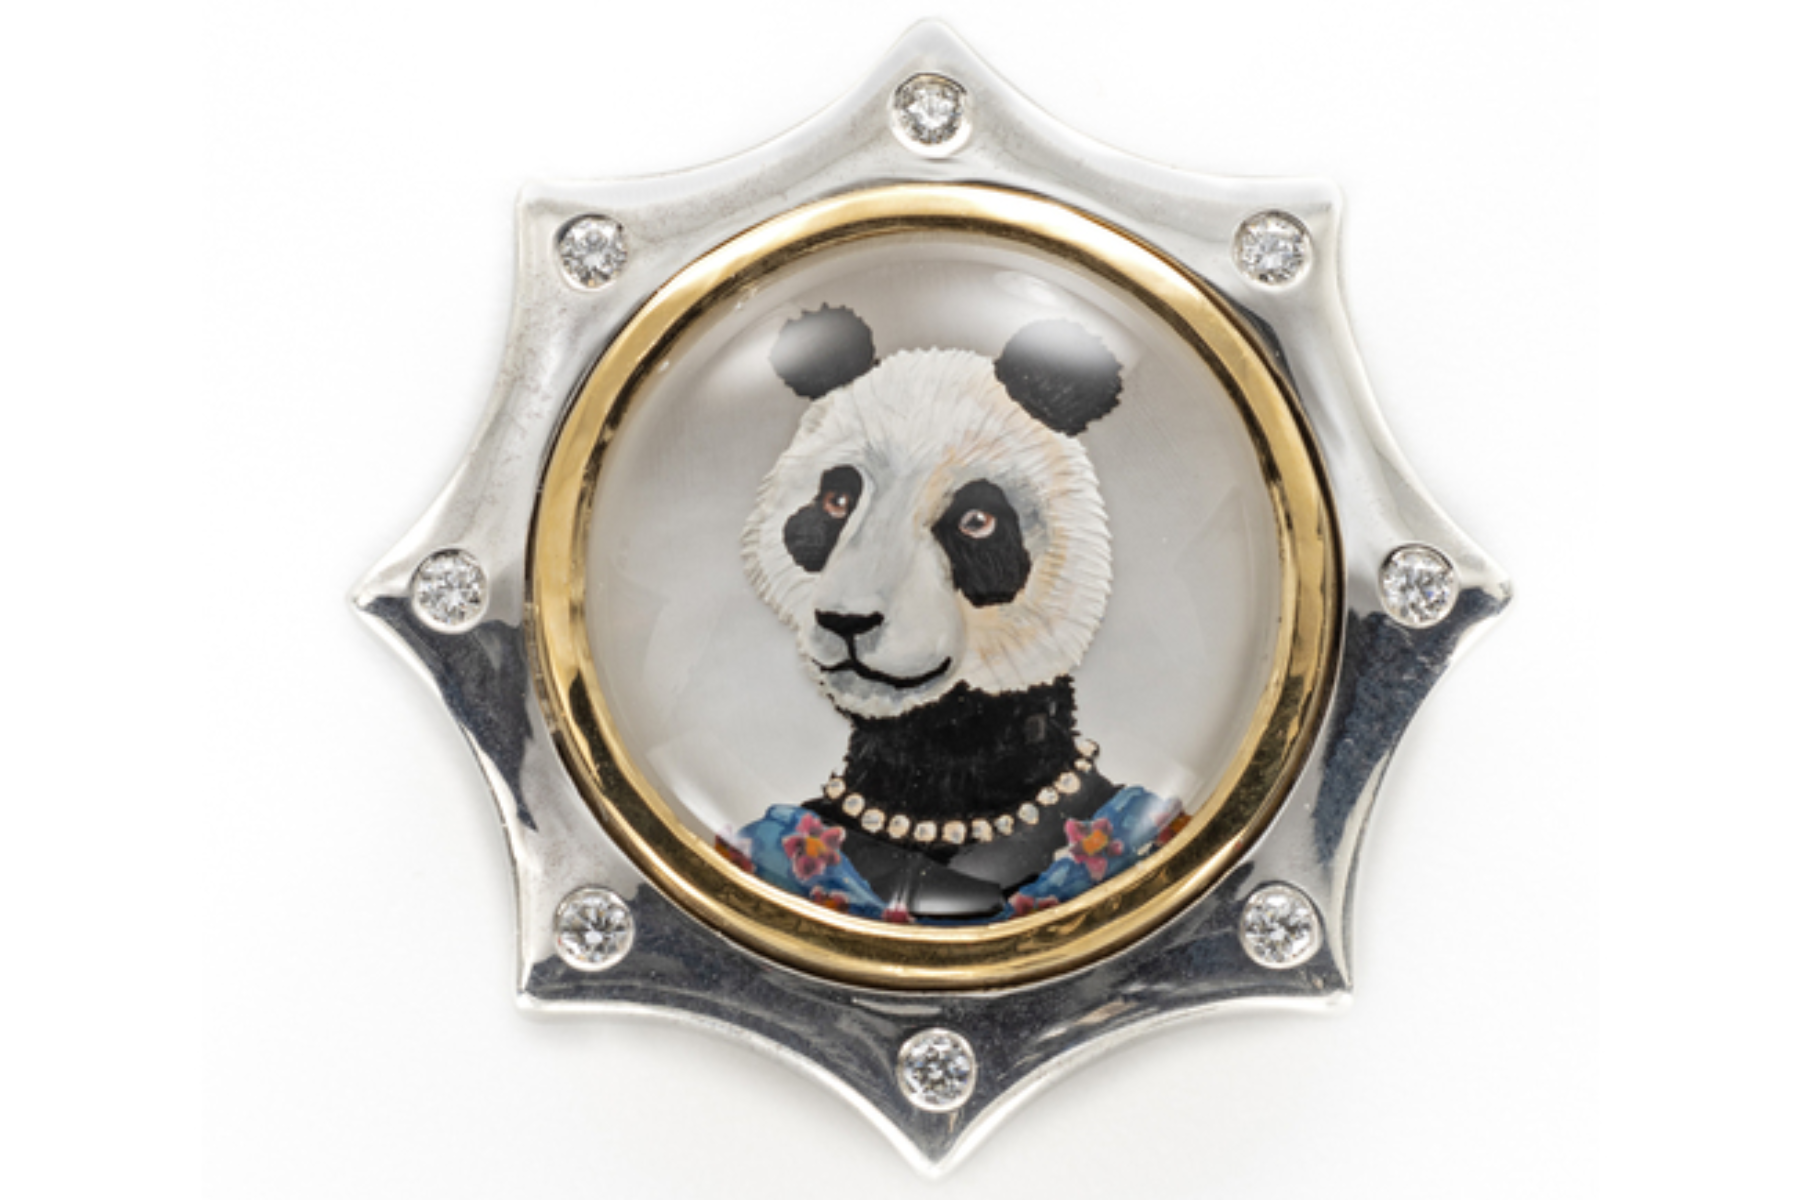 Rémanimals jewelry with a hand-painted panda wearing clothes and a necklace